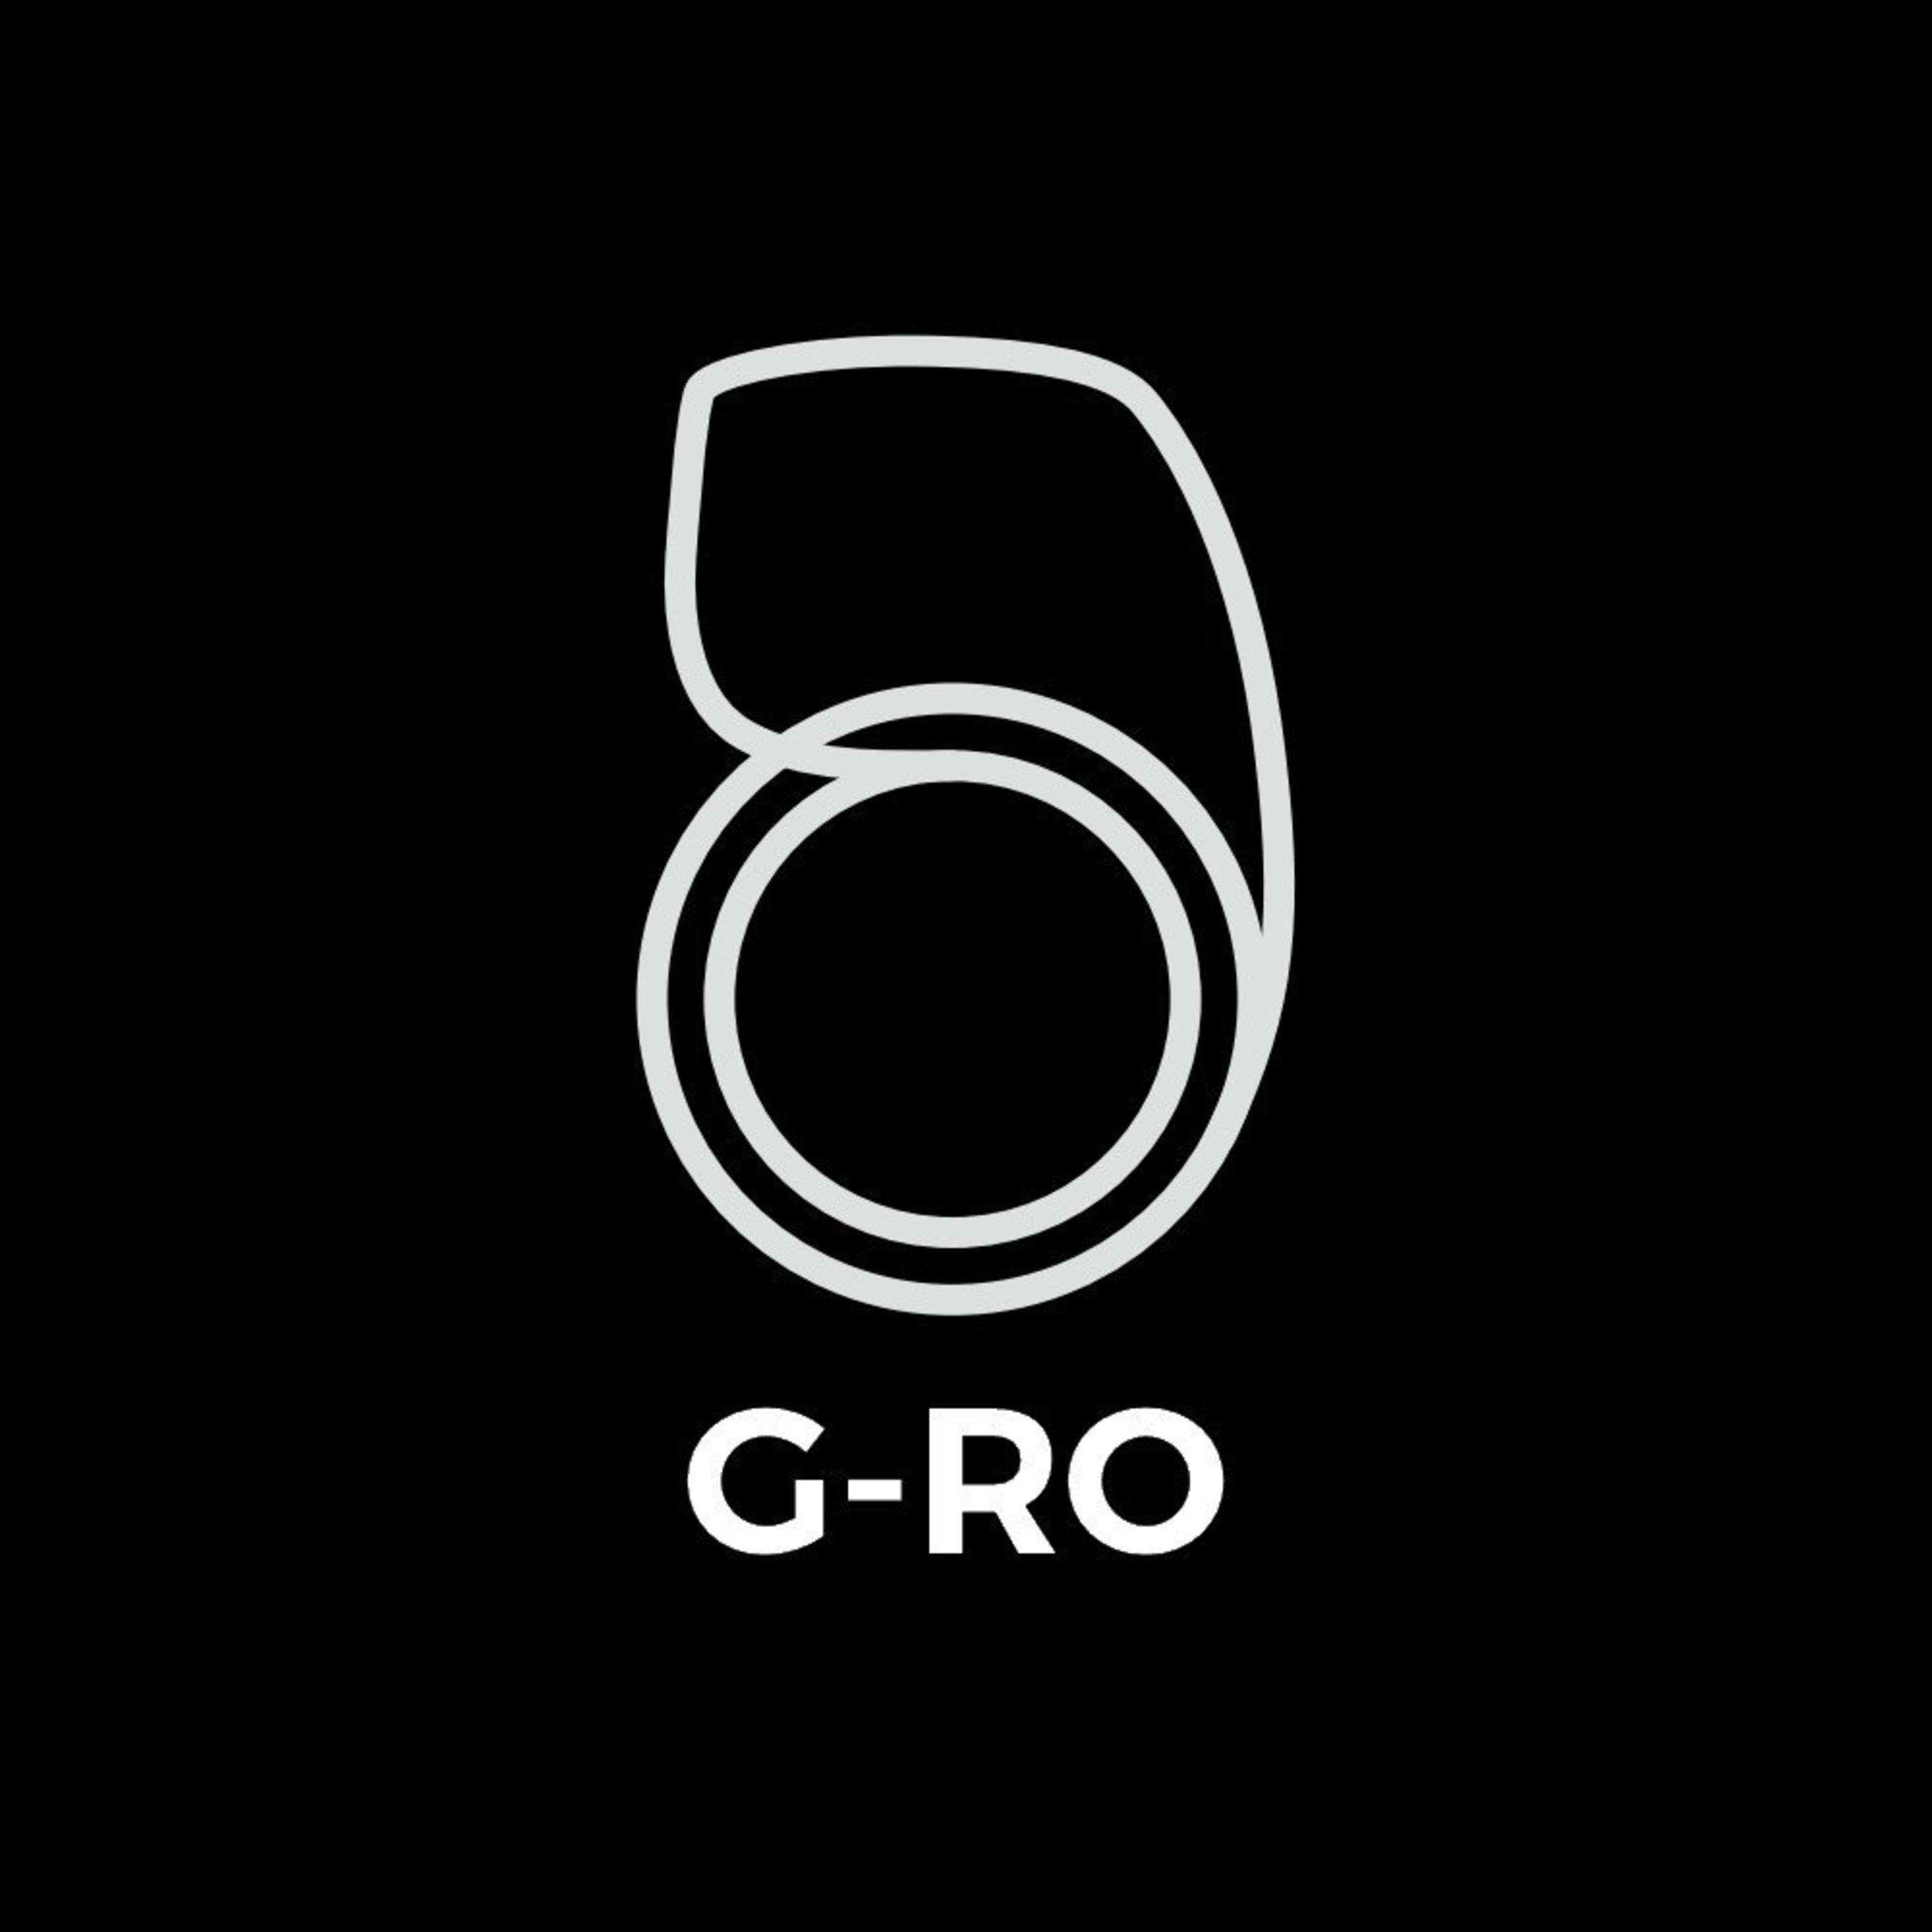 G-RO: Revolutionary Carry-on Luggage